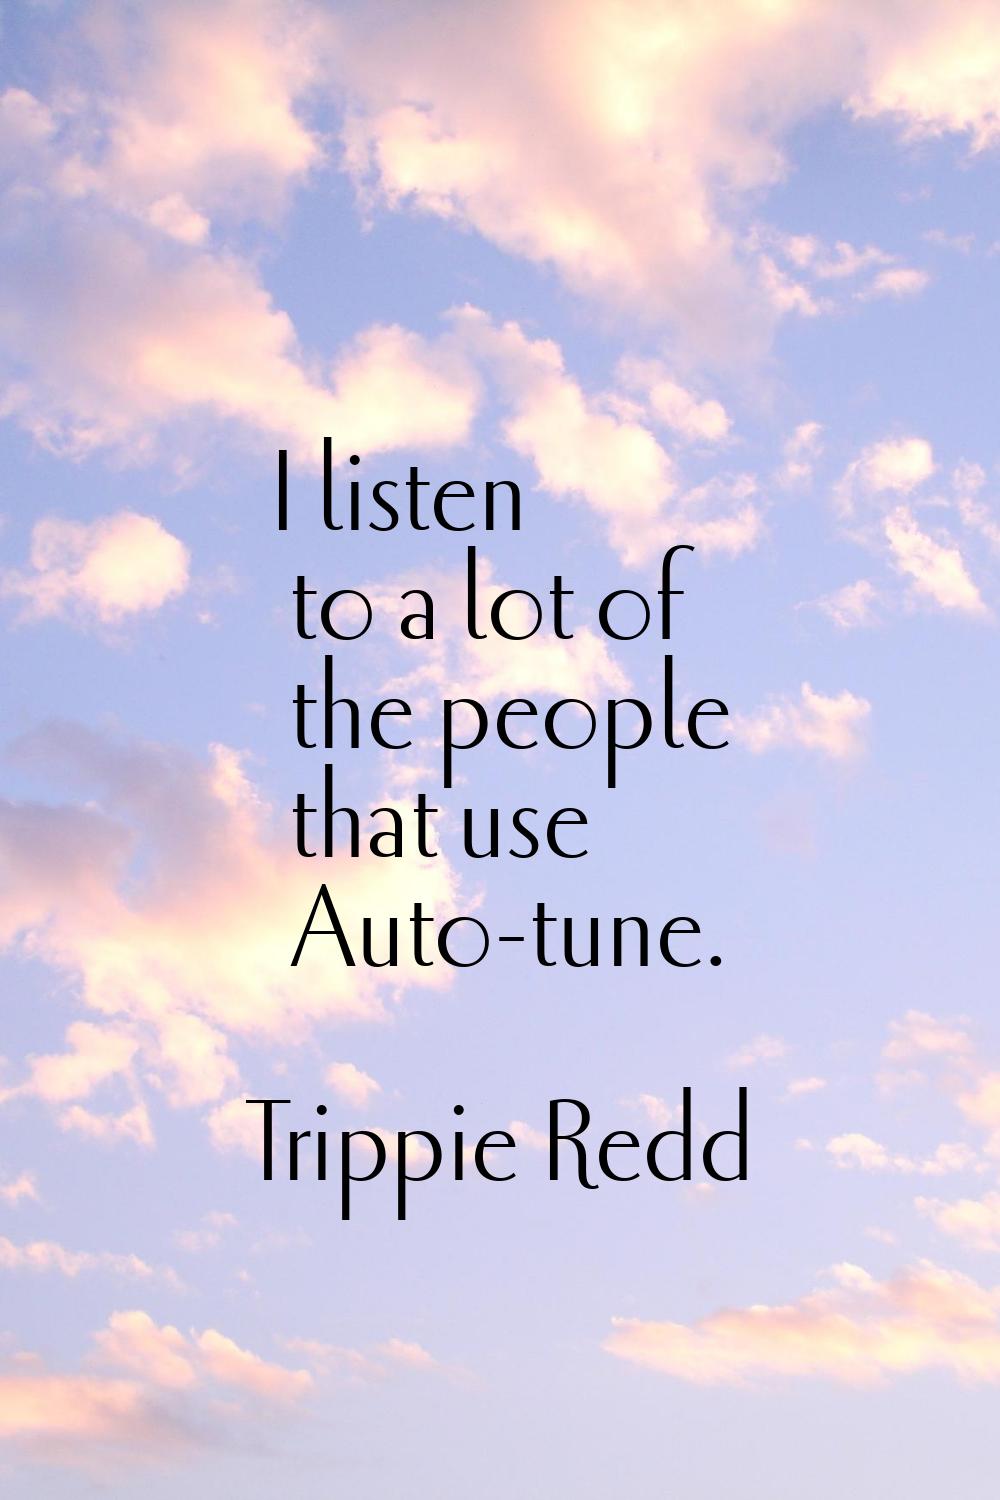 I listen to a lot of the people that use Auto-tune.